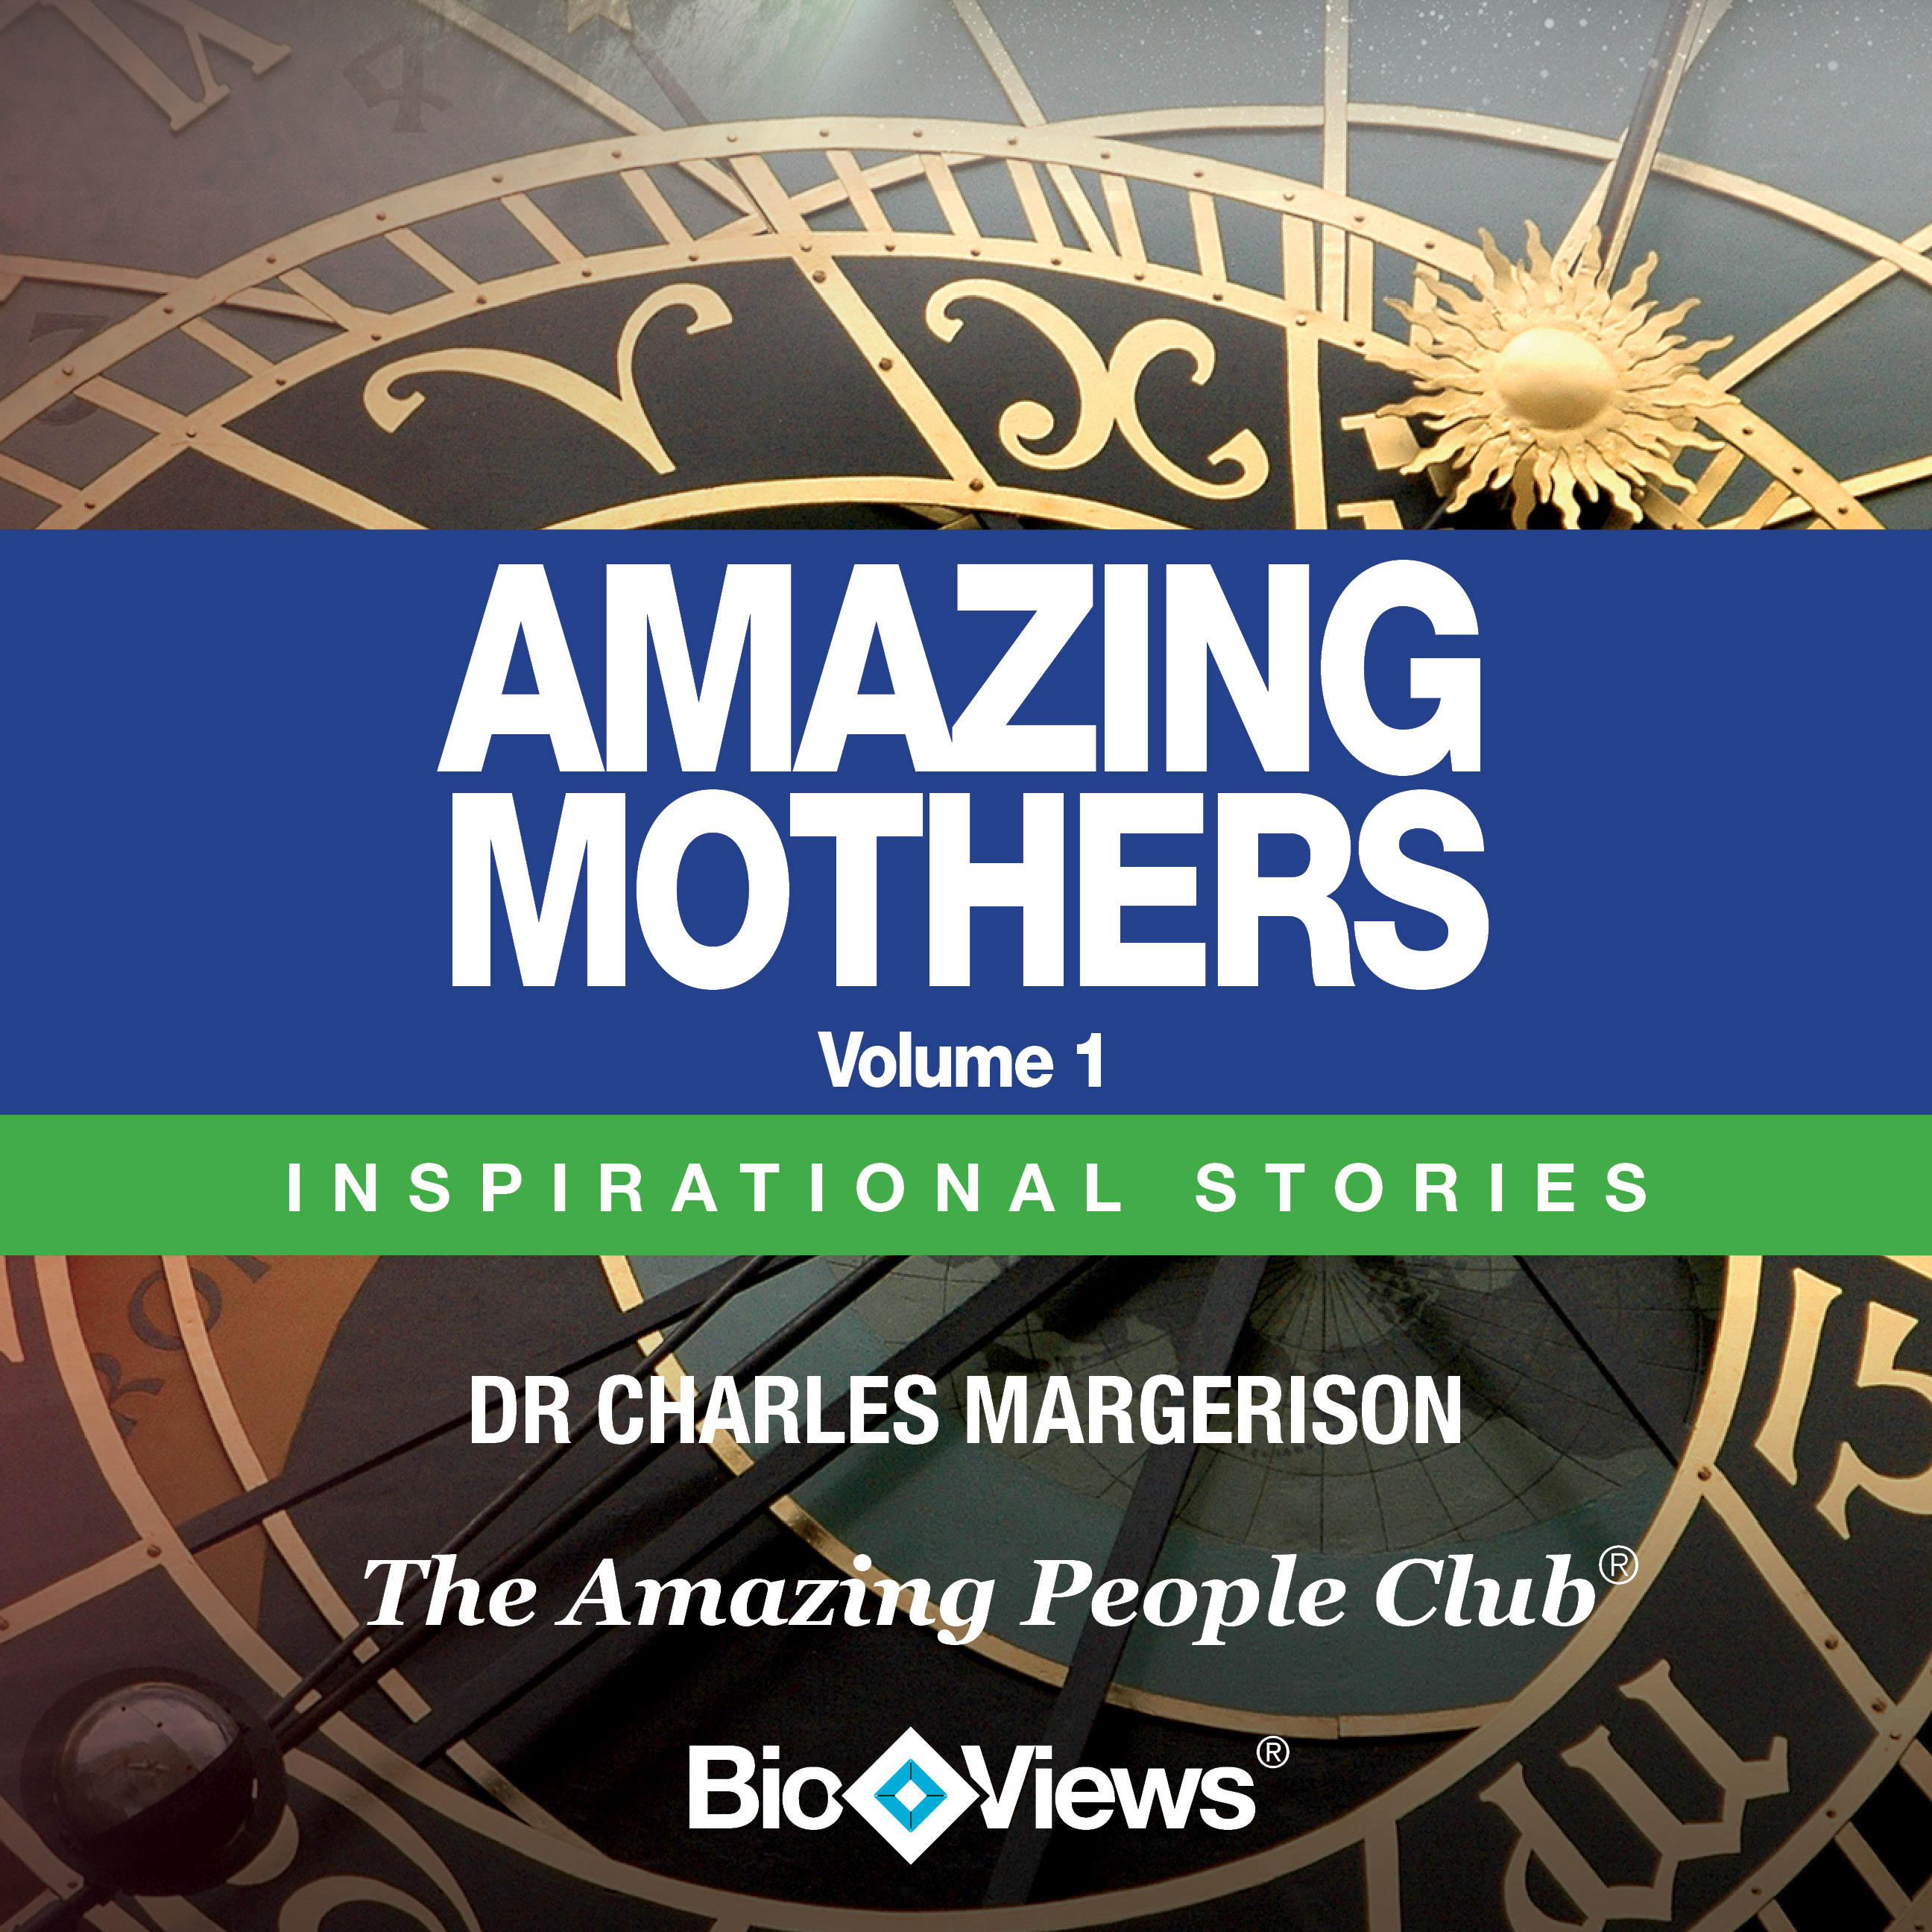 Amazing Mothers, Vol. 1: Inspirational Stories Audiobook, by Charles Margerison